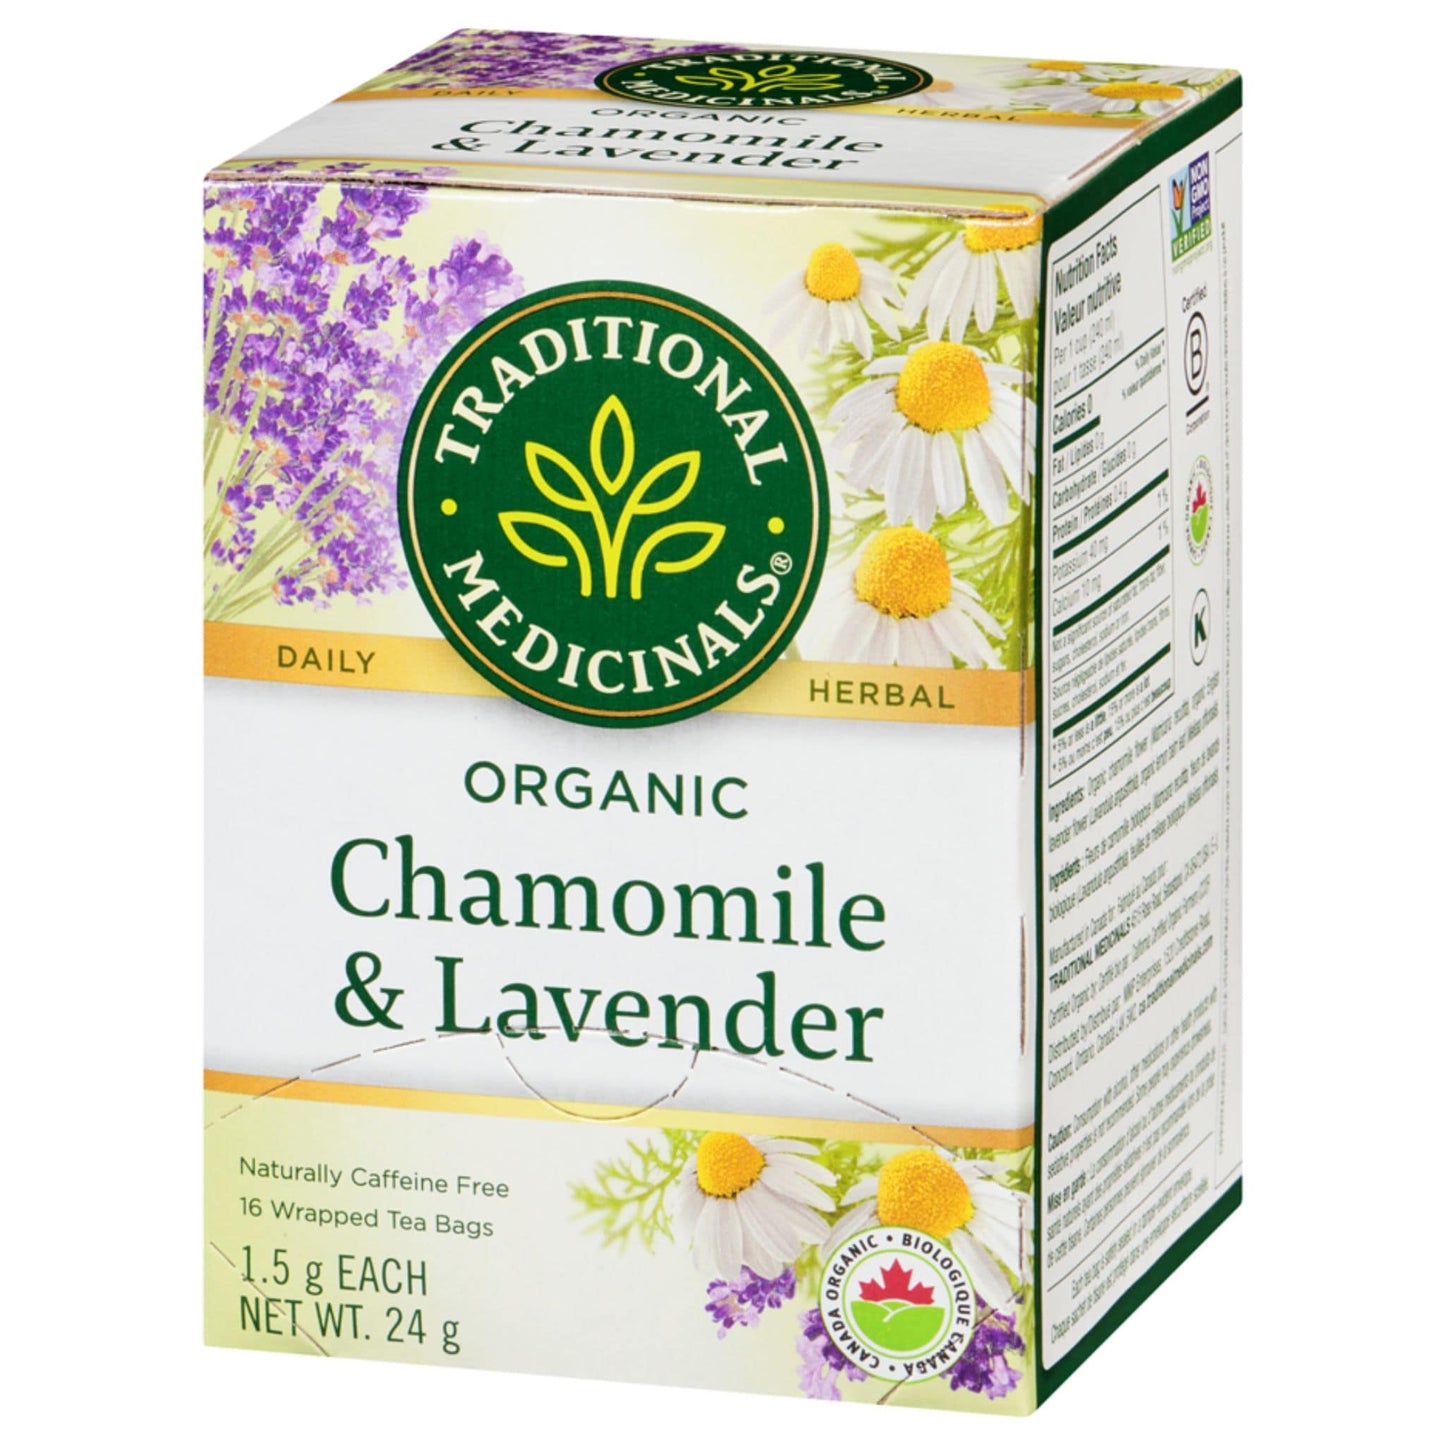 Traditional Medicinals Organic Chamomile with Lavender Tea, 16 Wrapped Tea Bags